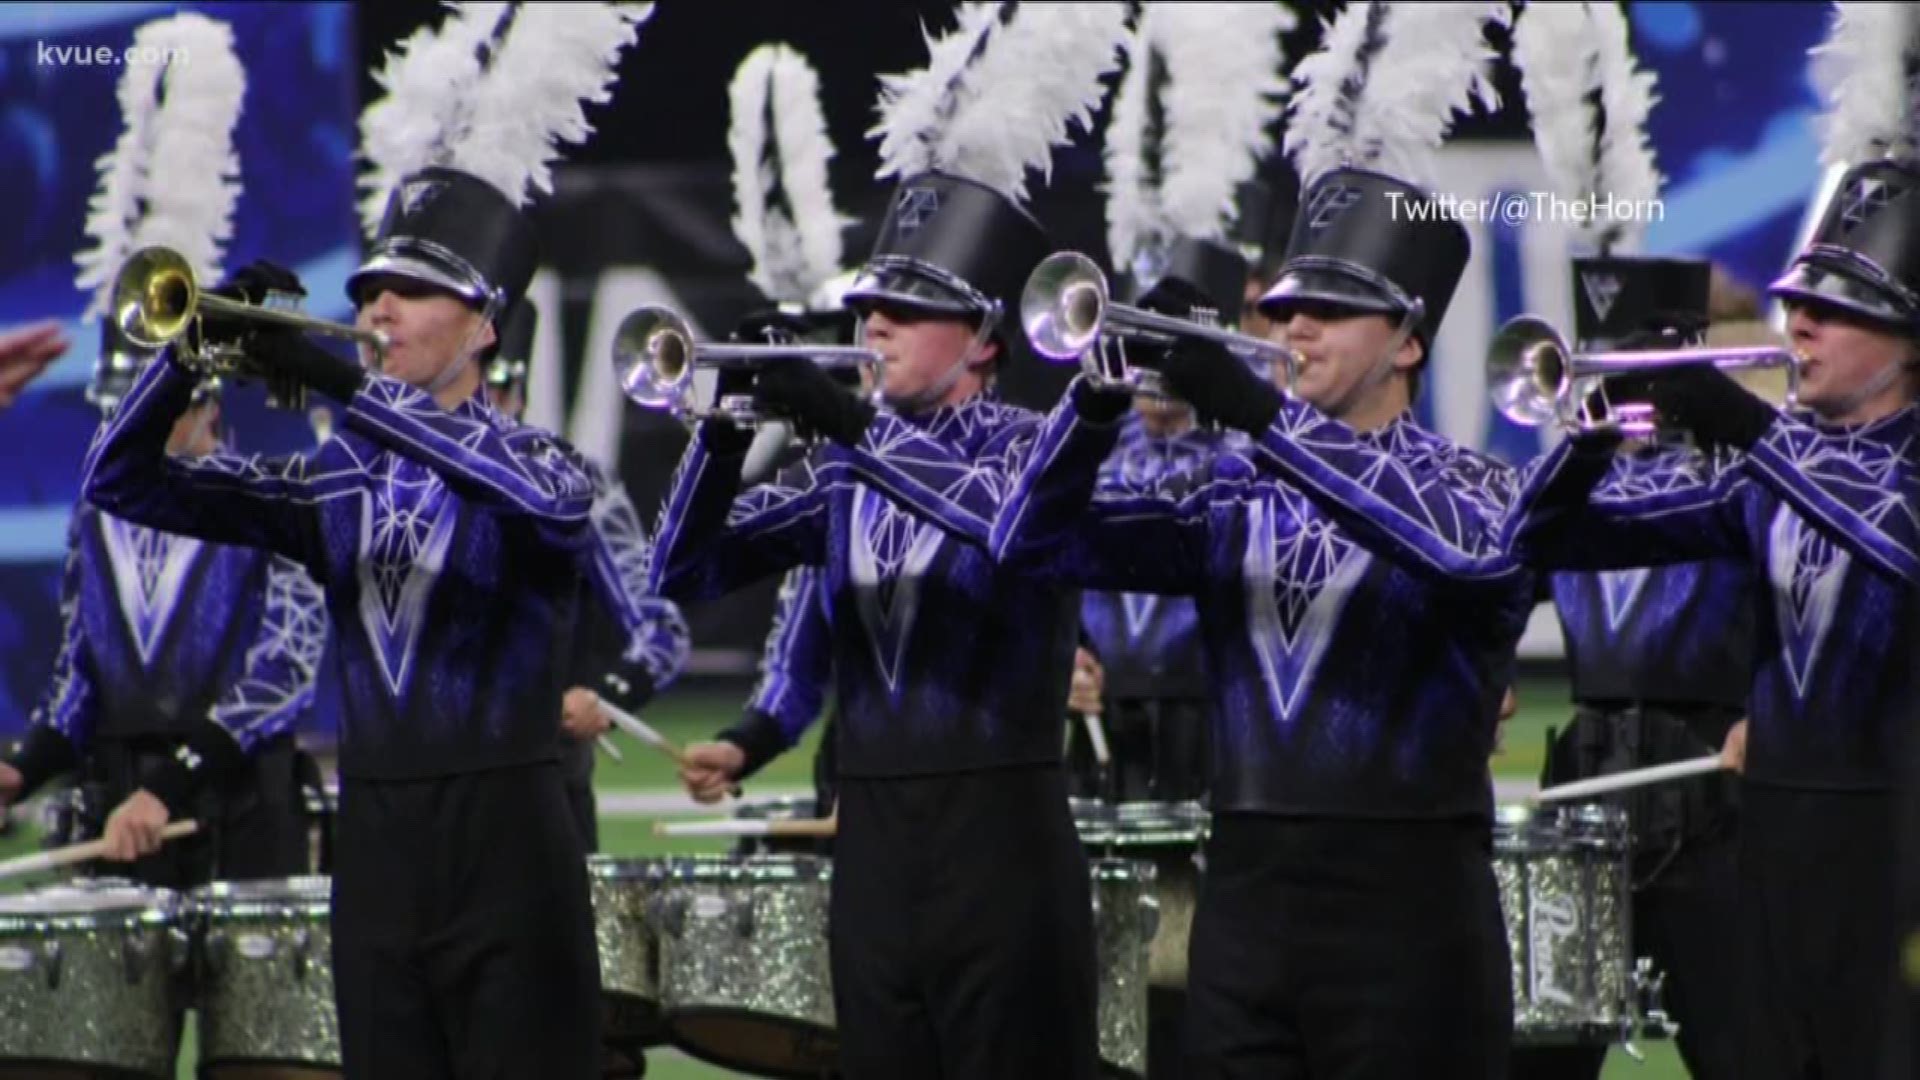 Vandergrift HS takes home gold at Bands of America Grand Nationals Marching Contest. 